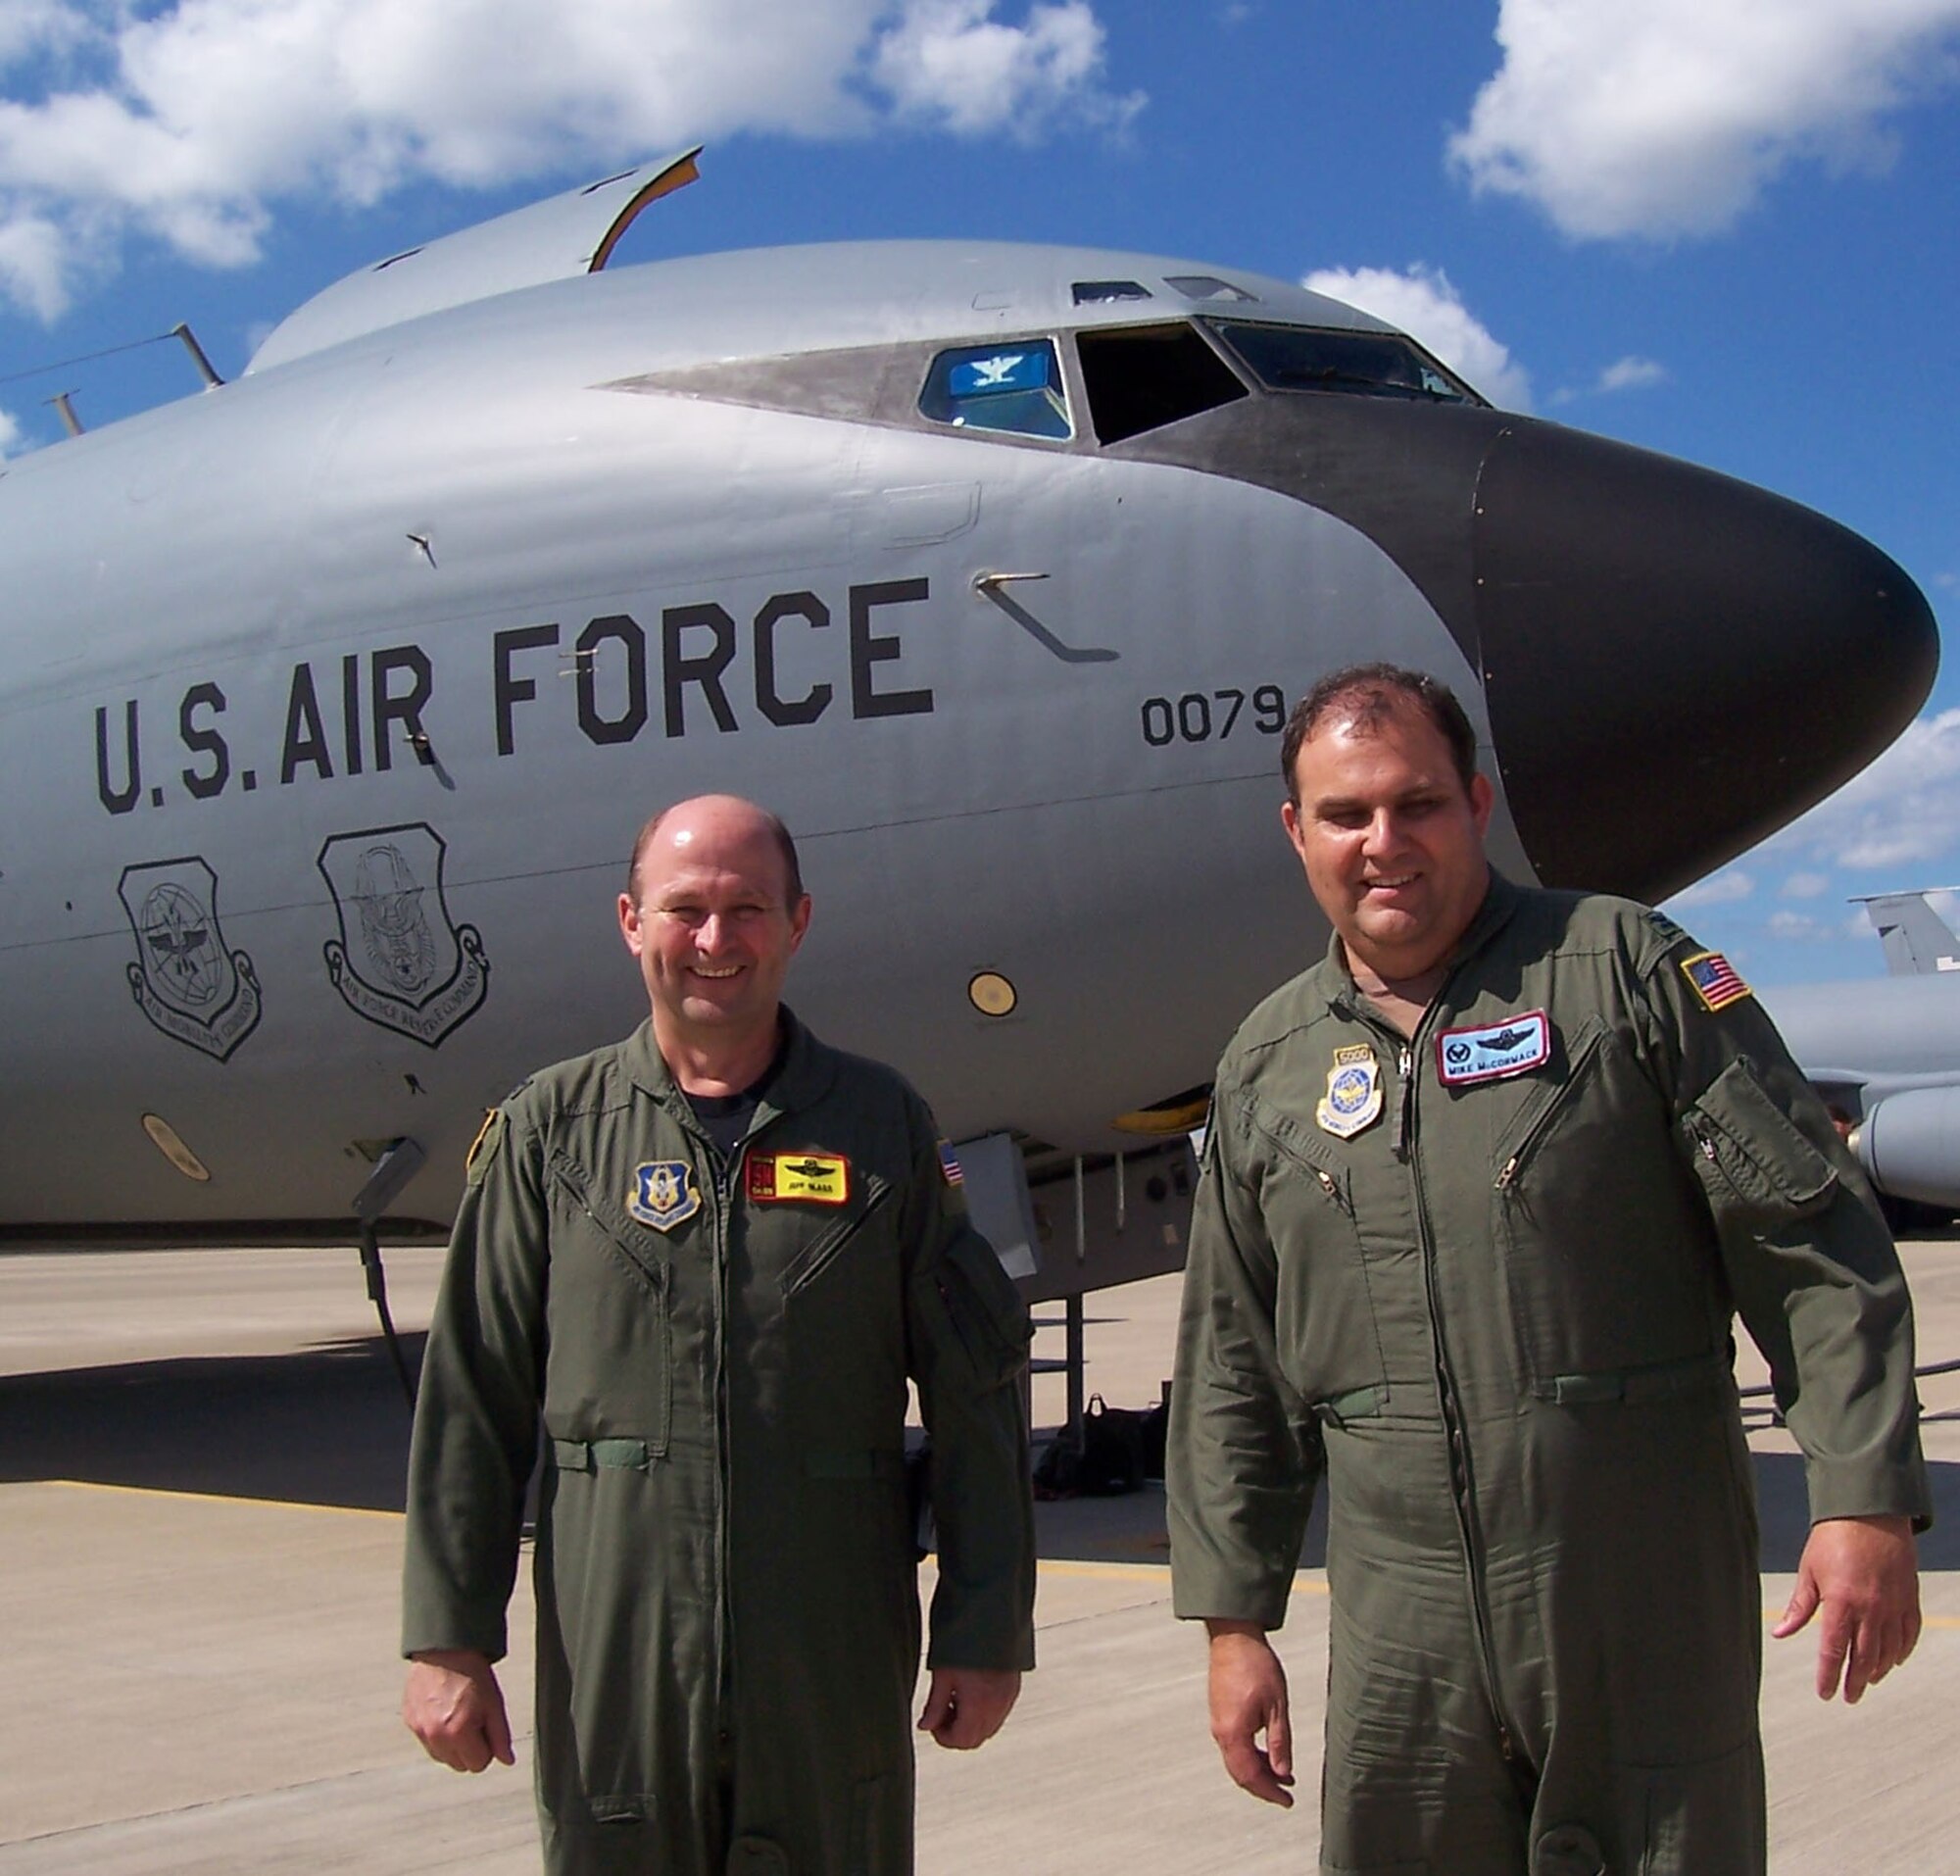 Col. Jeffery R. Glass, 507th Air Refueling Wing commander, and Col. James McCormack, 137th Airlift Wing commander, pause a moment on the flight line prior to their first duo commander mission.  Colonel McCormack's Air National Guard wing is slated to stand up as a KC-135R associate wing affiliated with Colonel Glass's Air Force Reserve Command wing in late 2007. The merger is the first time an Air National Guard wing has associated to an Air Force Reserve wing.